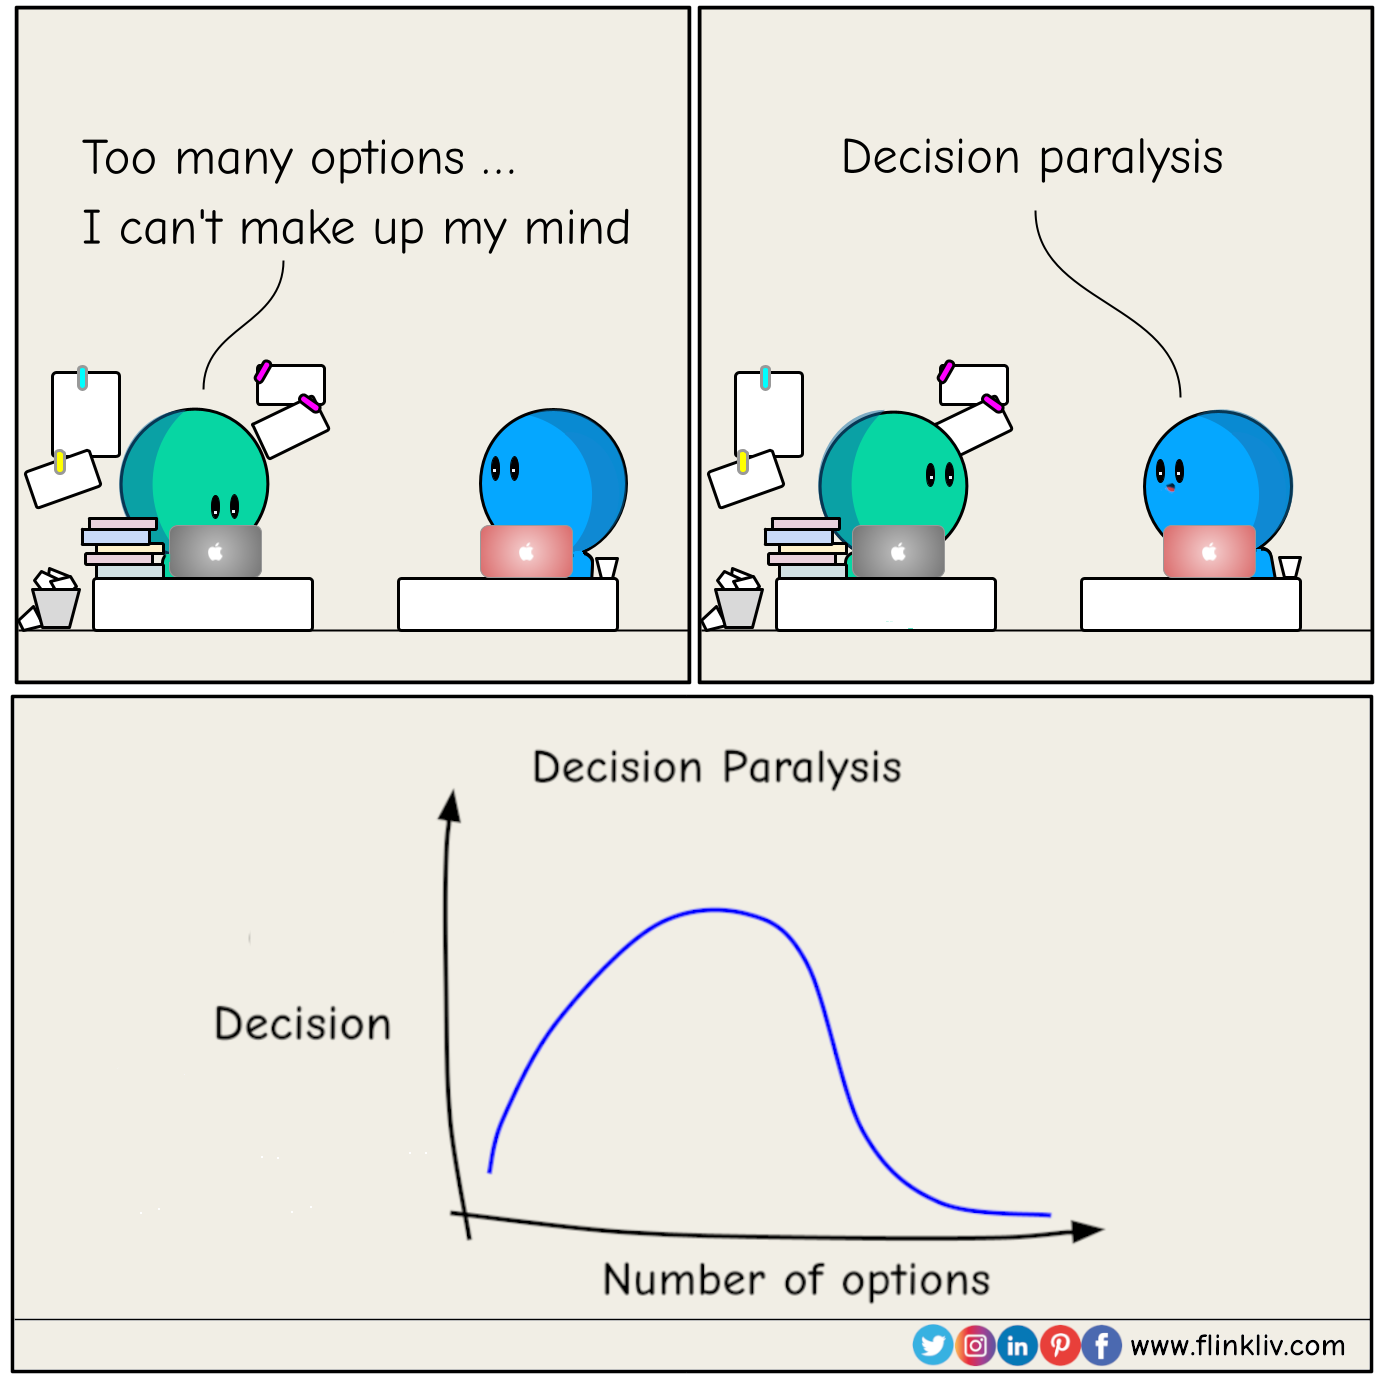 Conversation between A and B about decision paralysis. 
            A: I am unable to make any decision with so many options and choices. 
			B: Decision paralysis.
			B: The more options you have, the harder it becomes to make decisions.
			